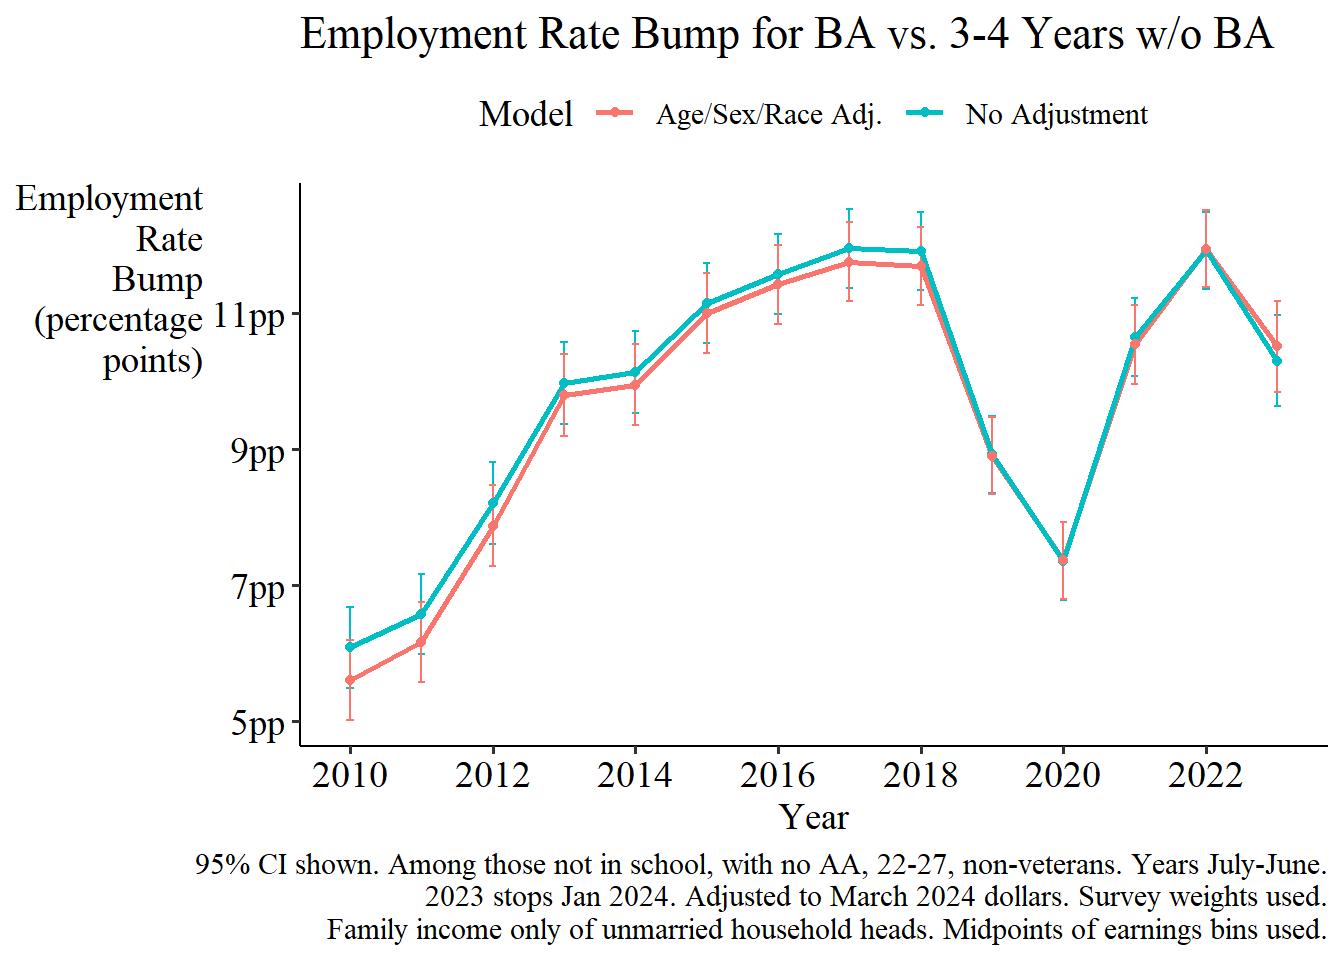 BA vs. non-grad employment rate bump over time. See text for description of findings.